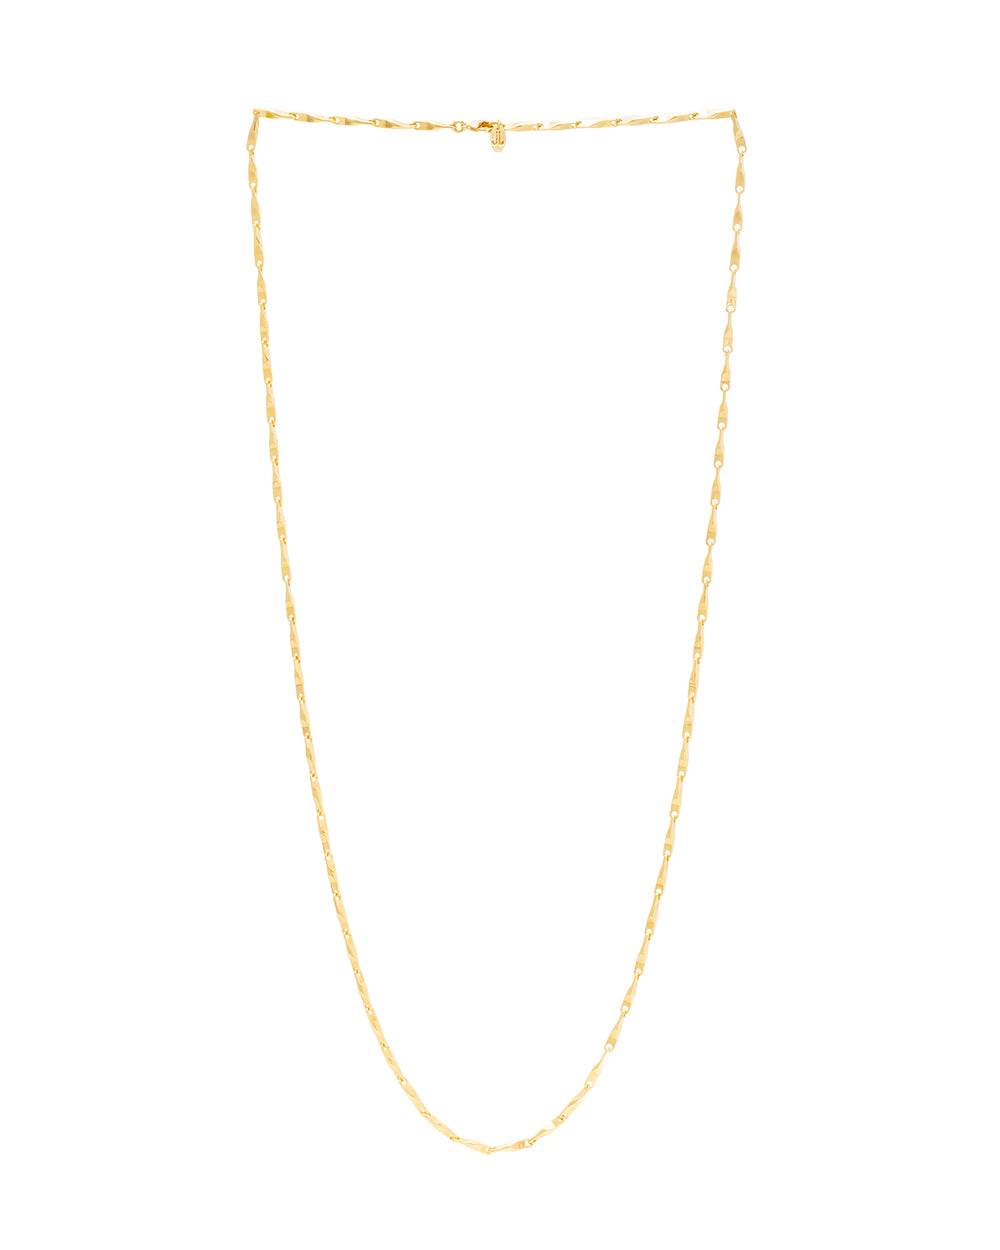 K22 Vintage necklace made of brass plated with 24K gold / length 90 cm